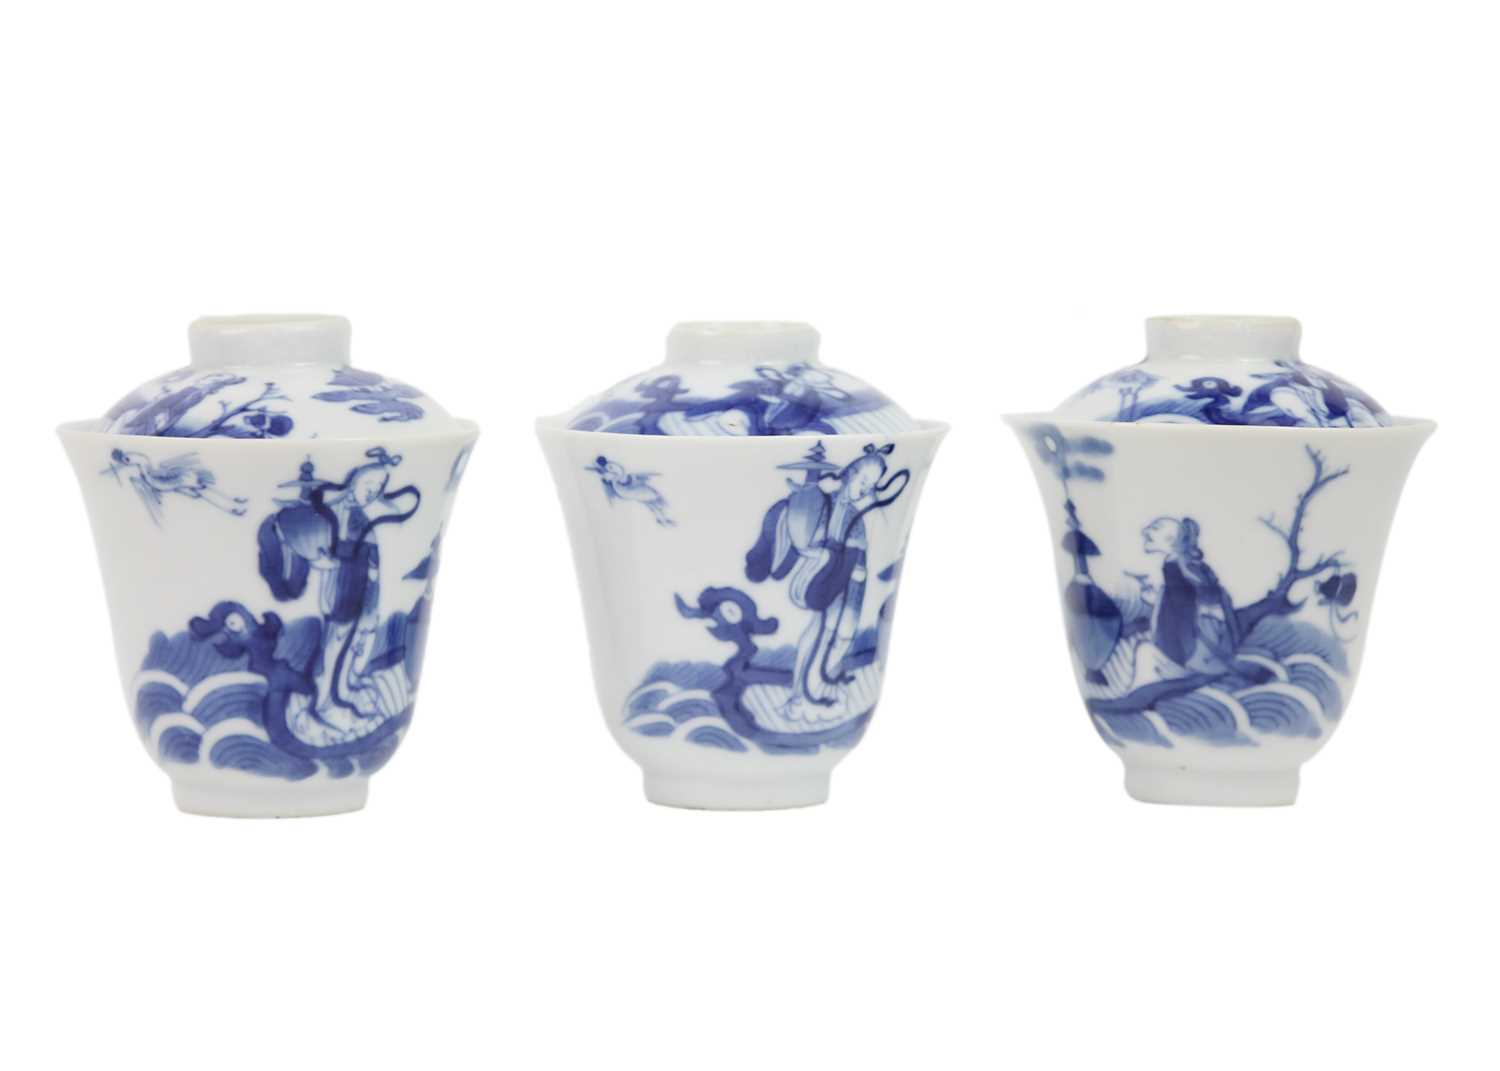 A set of Chinese blue and white porcelain cups, covers and stands, 18th century. - Image 3 of 41